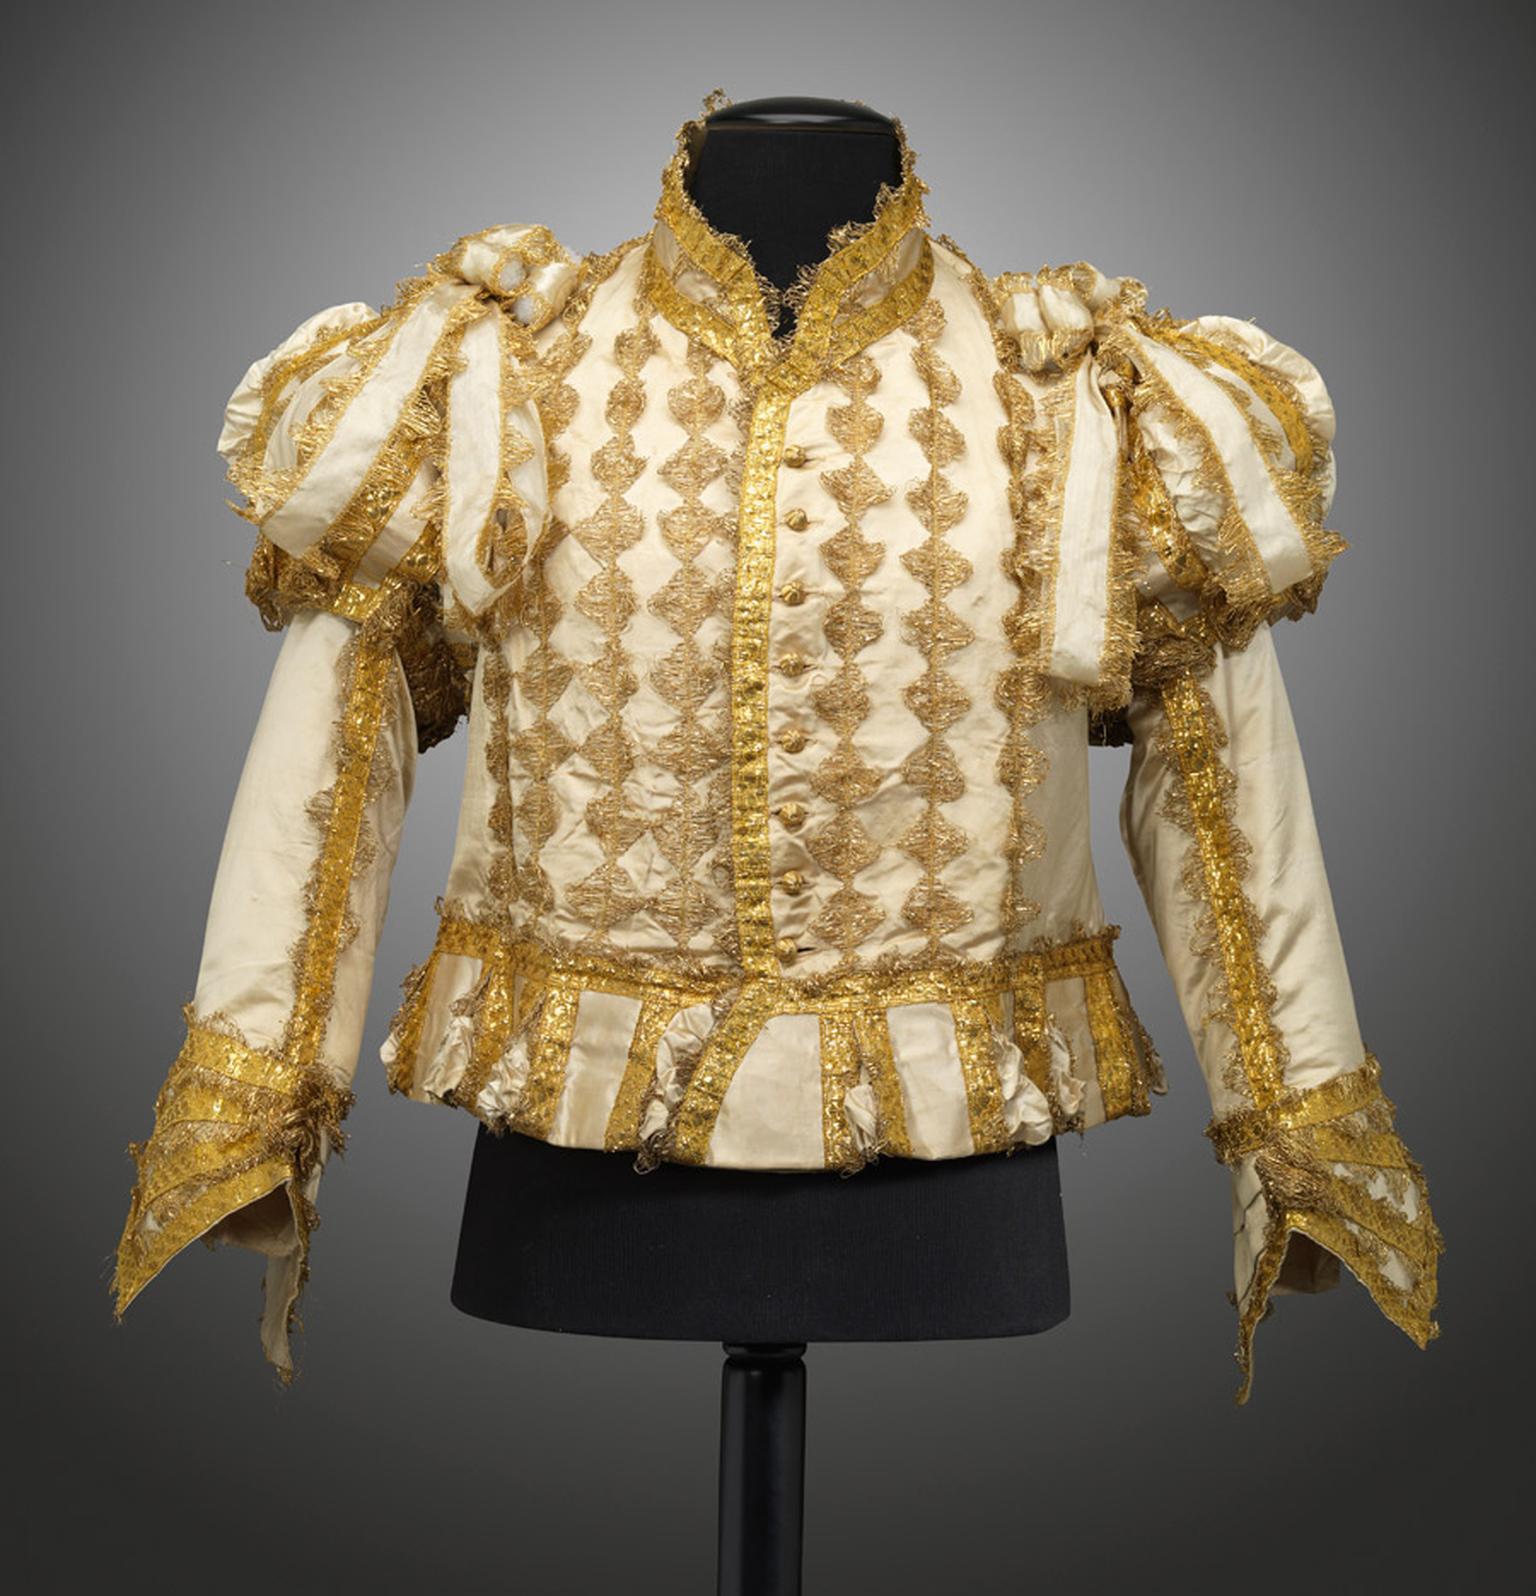 Goldsmiths-Silk-and-gold-jerkin-for-the-coronation-of-George-IV